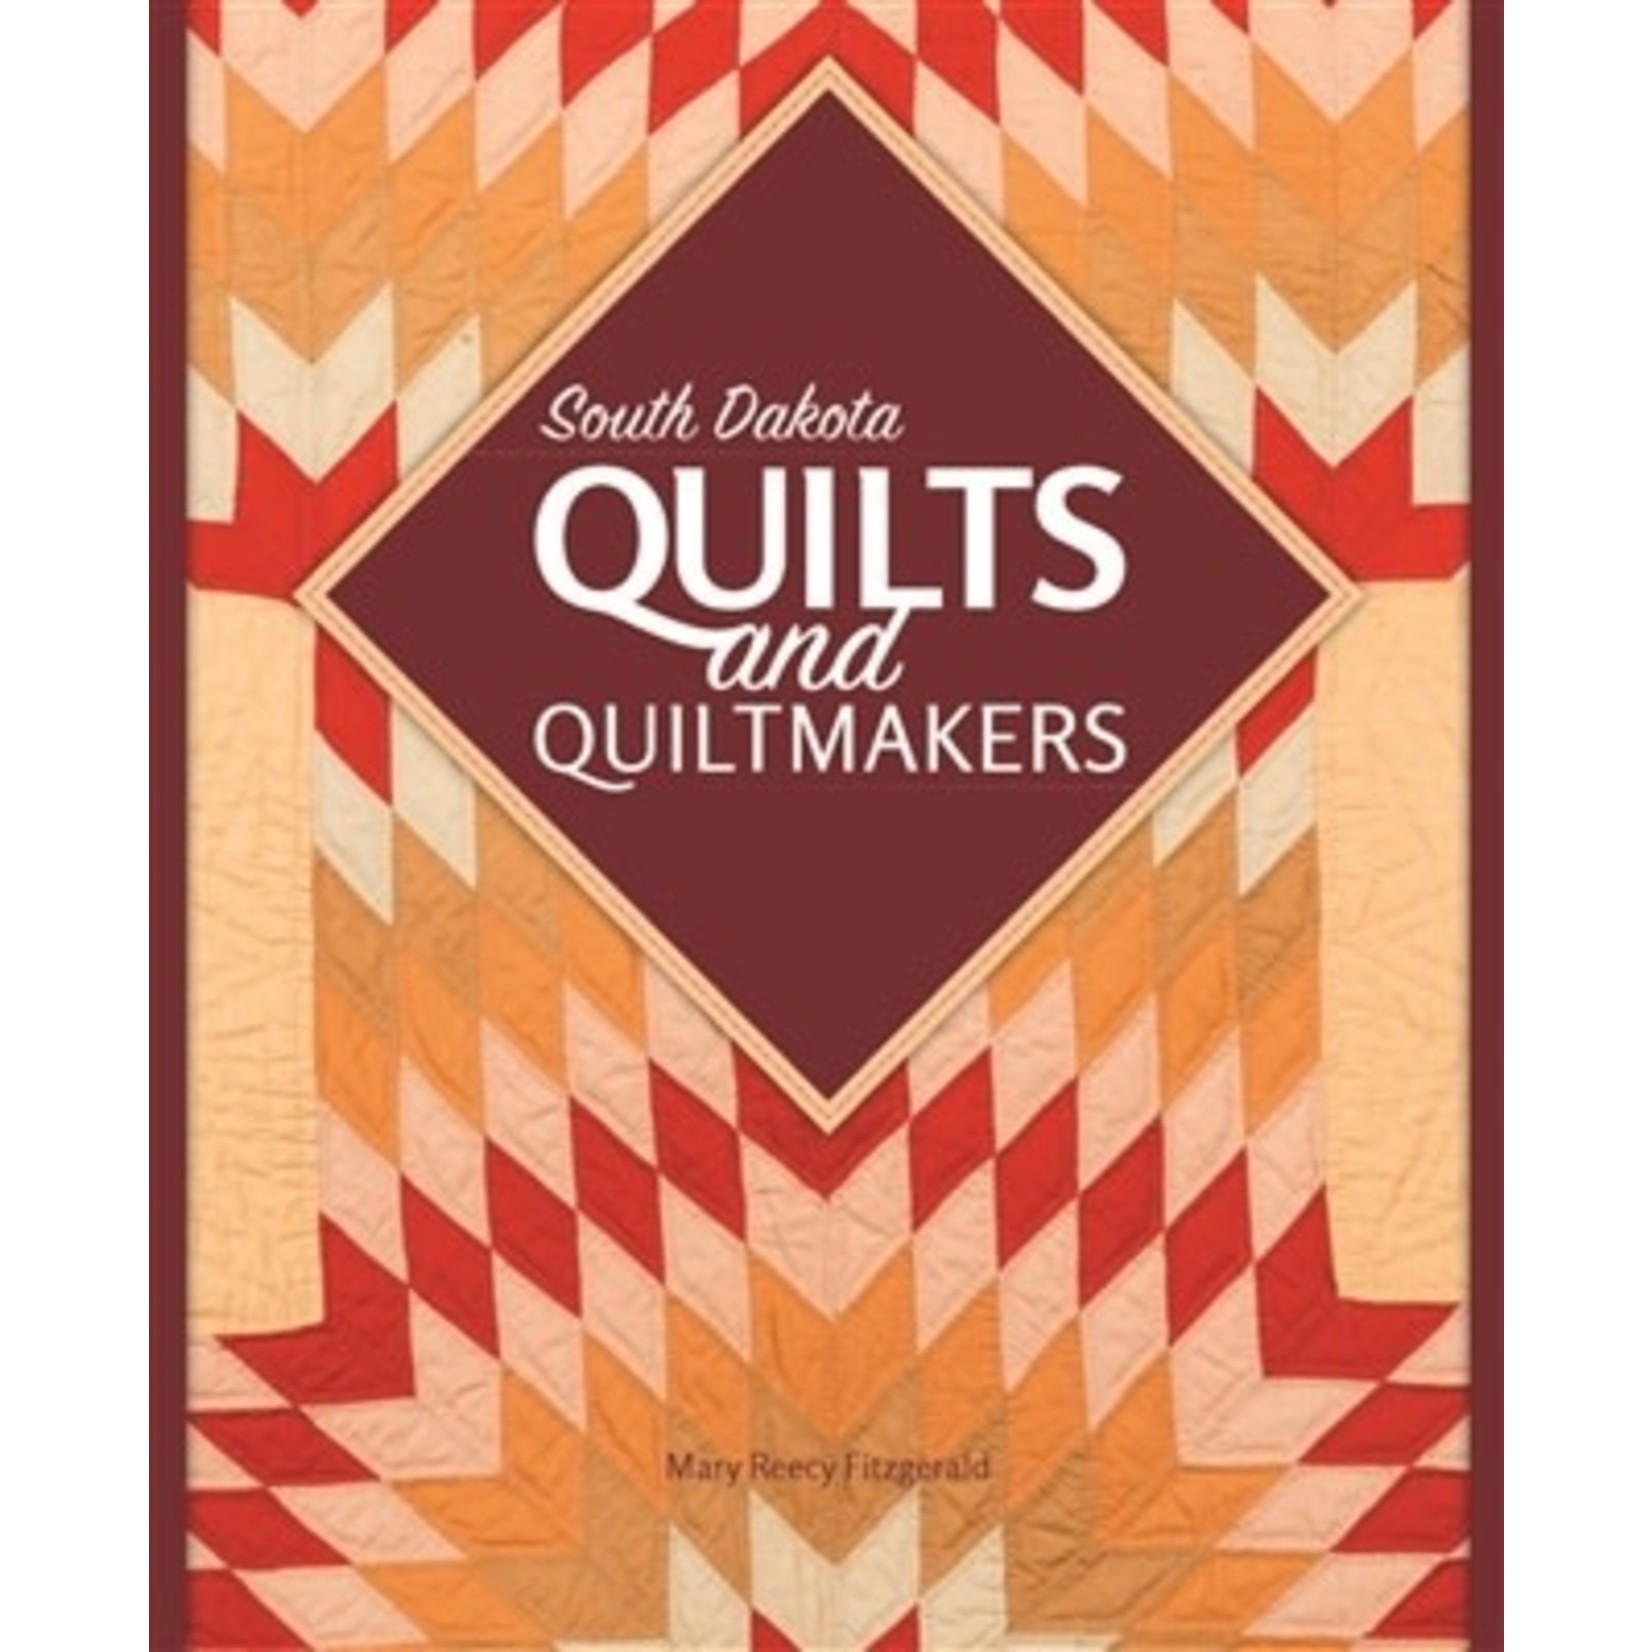 South Dakota Quilts and Quiltmakers